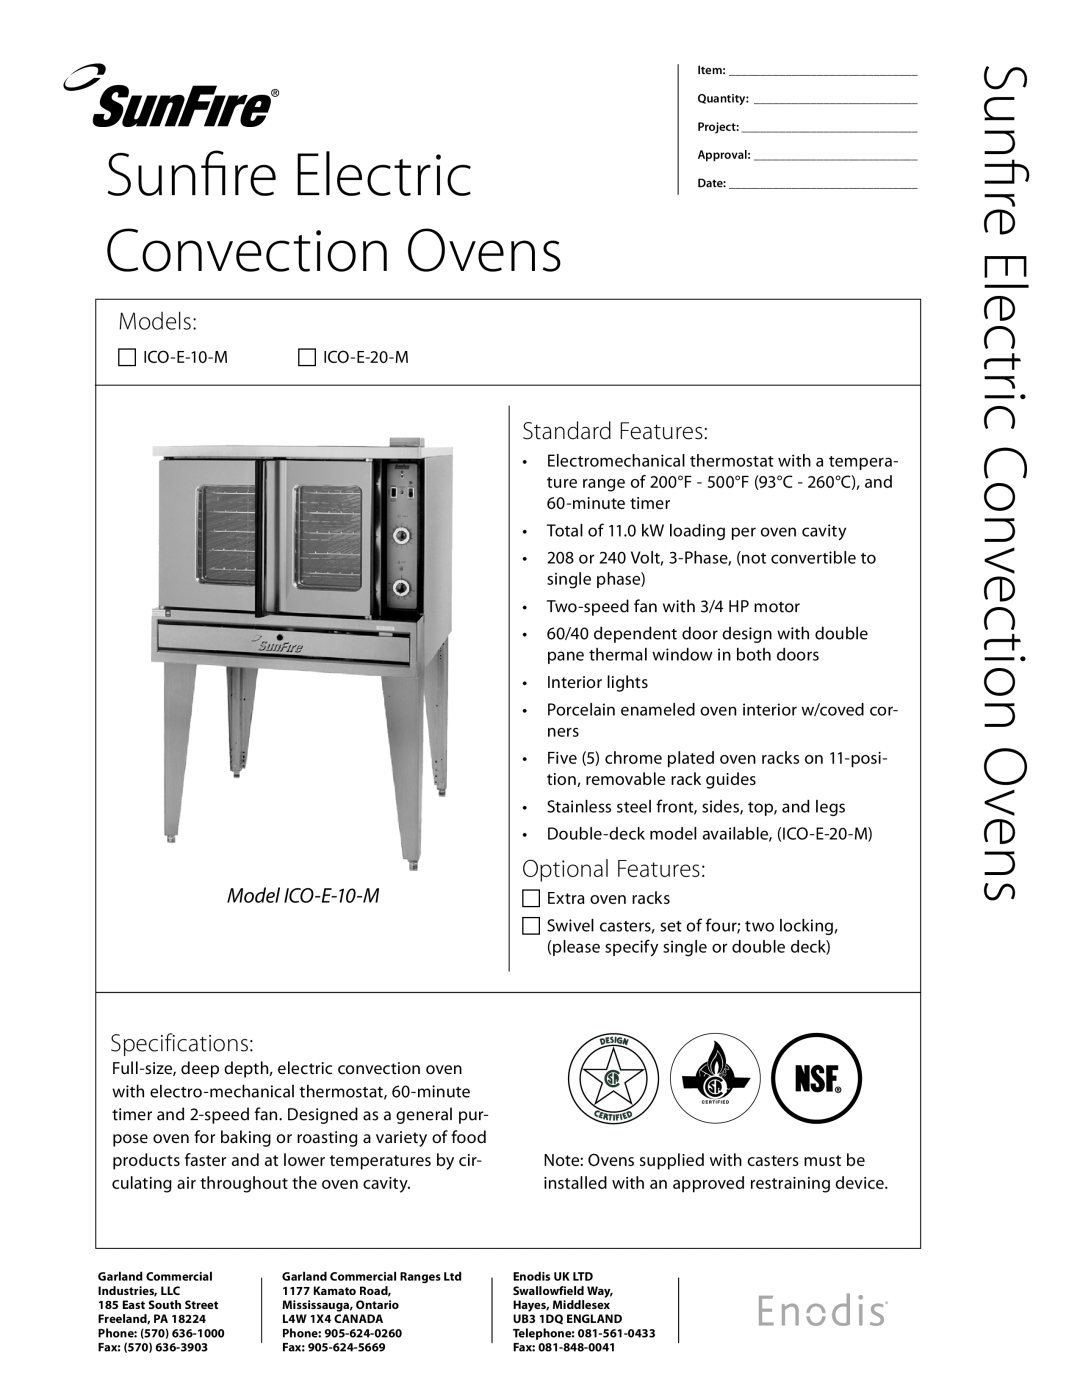 Sunfire ICO-E-20-M specifications Sunfire Electric, Electric Convection Ovens, Models, Standard Features 